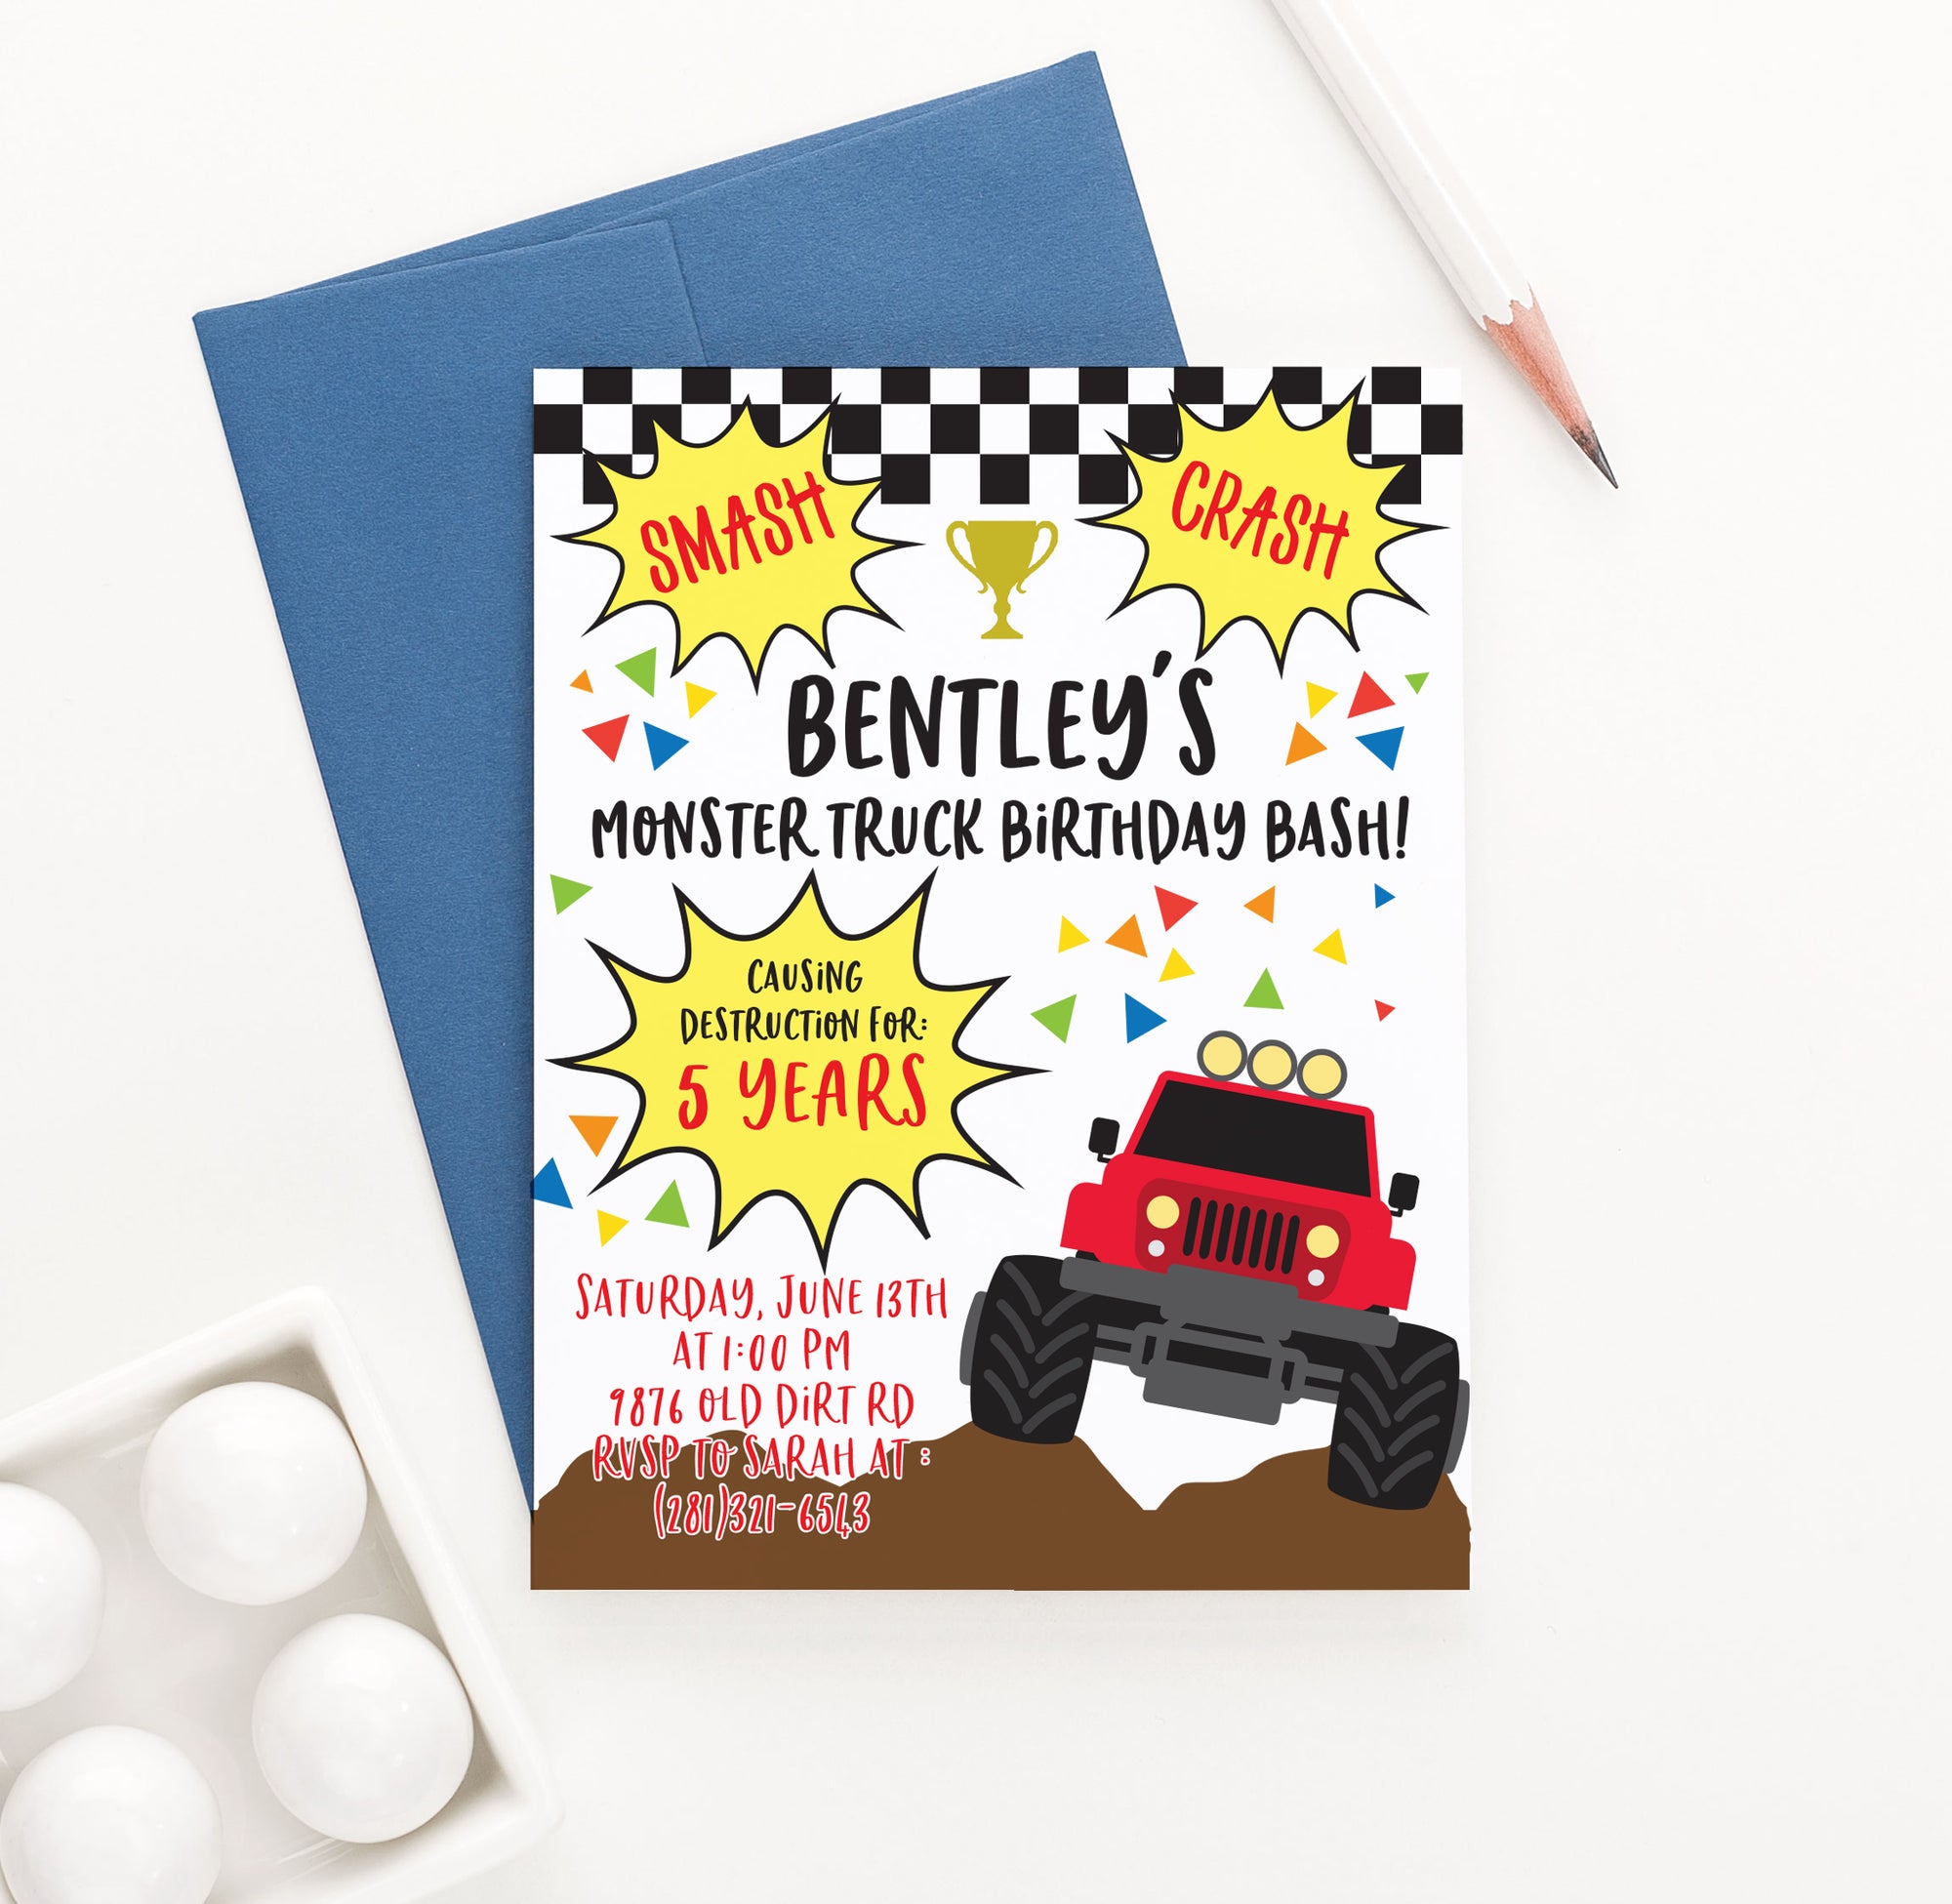 Personalized Monster Truck Party Invitations